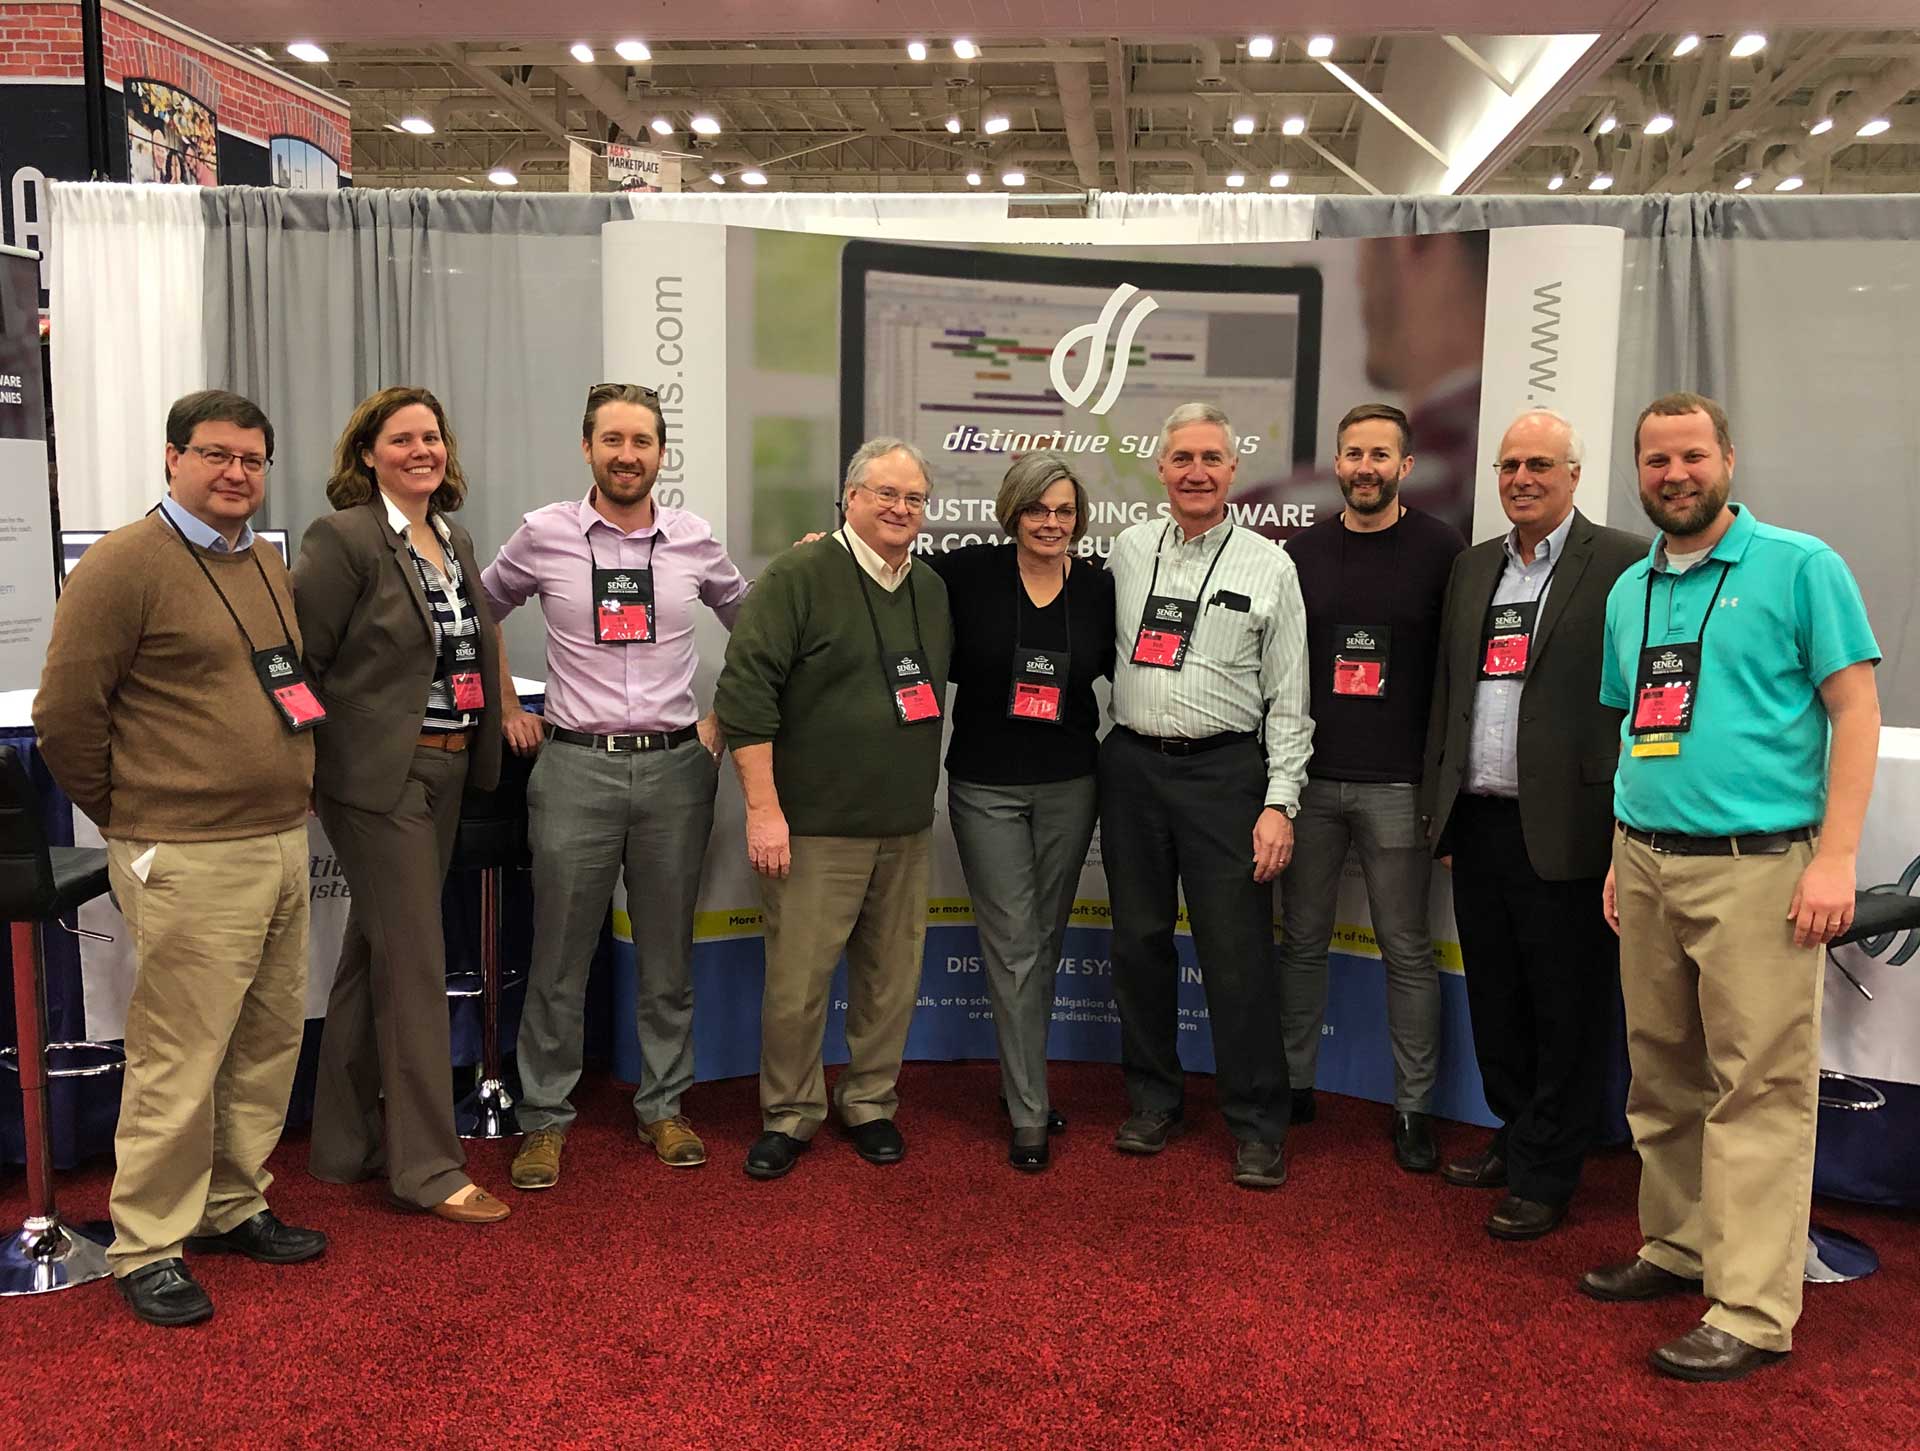 The Distinctive Systems Inc team at the ABA Marketplace 2019 in Louisville, KY.